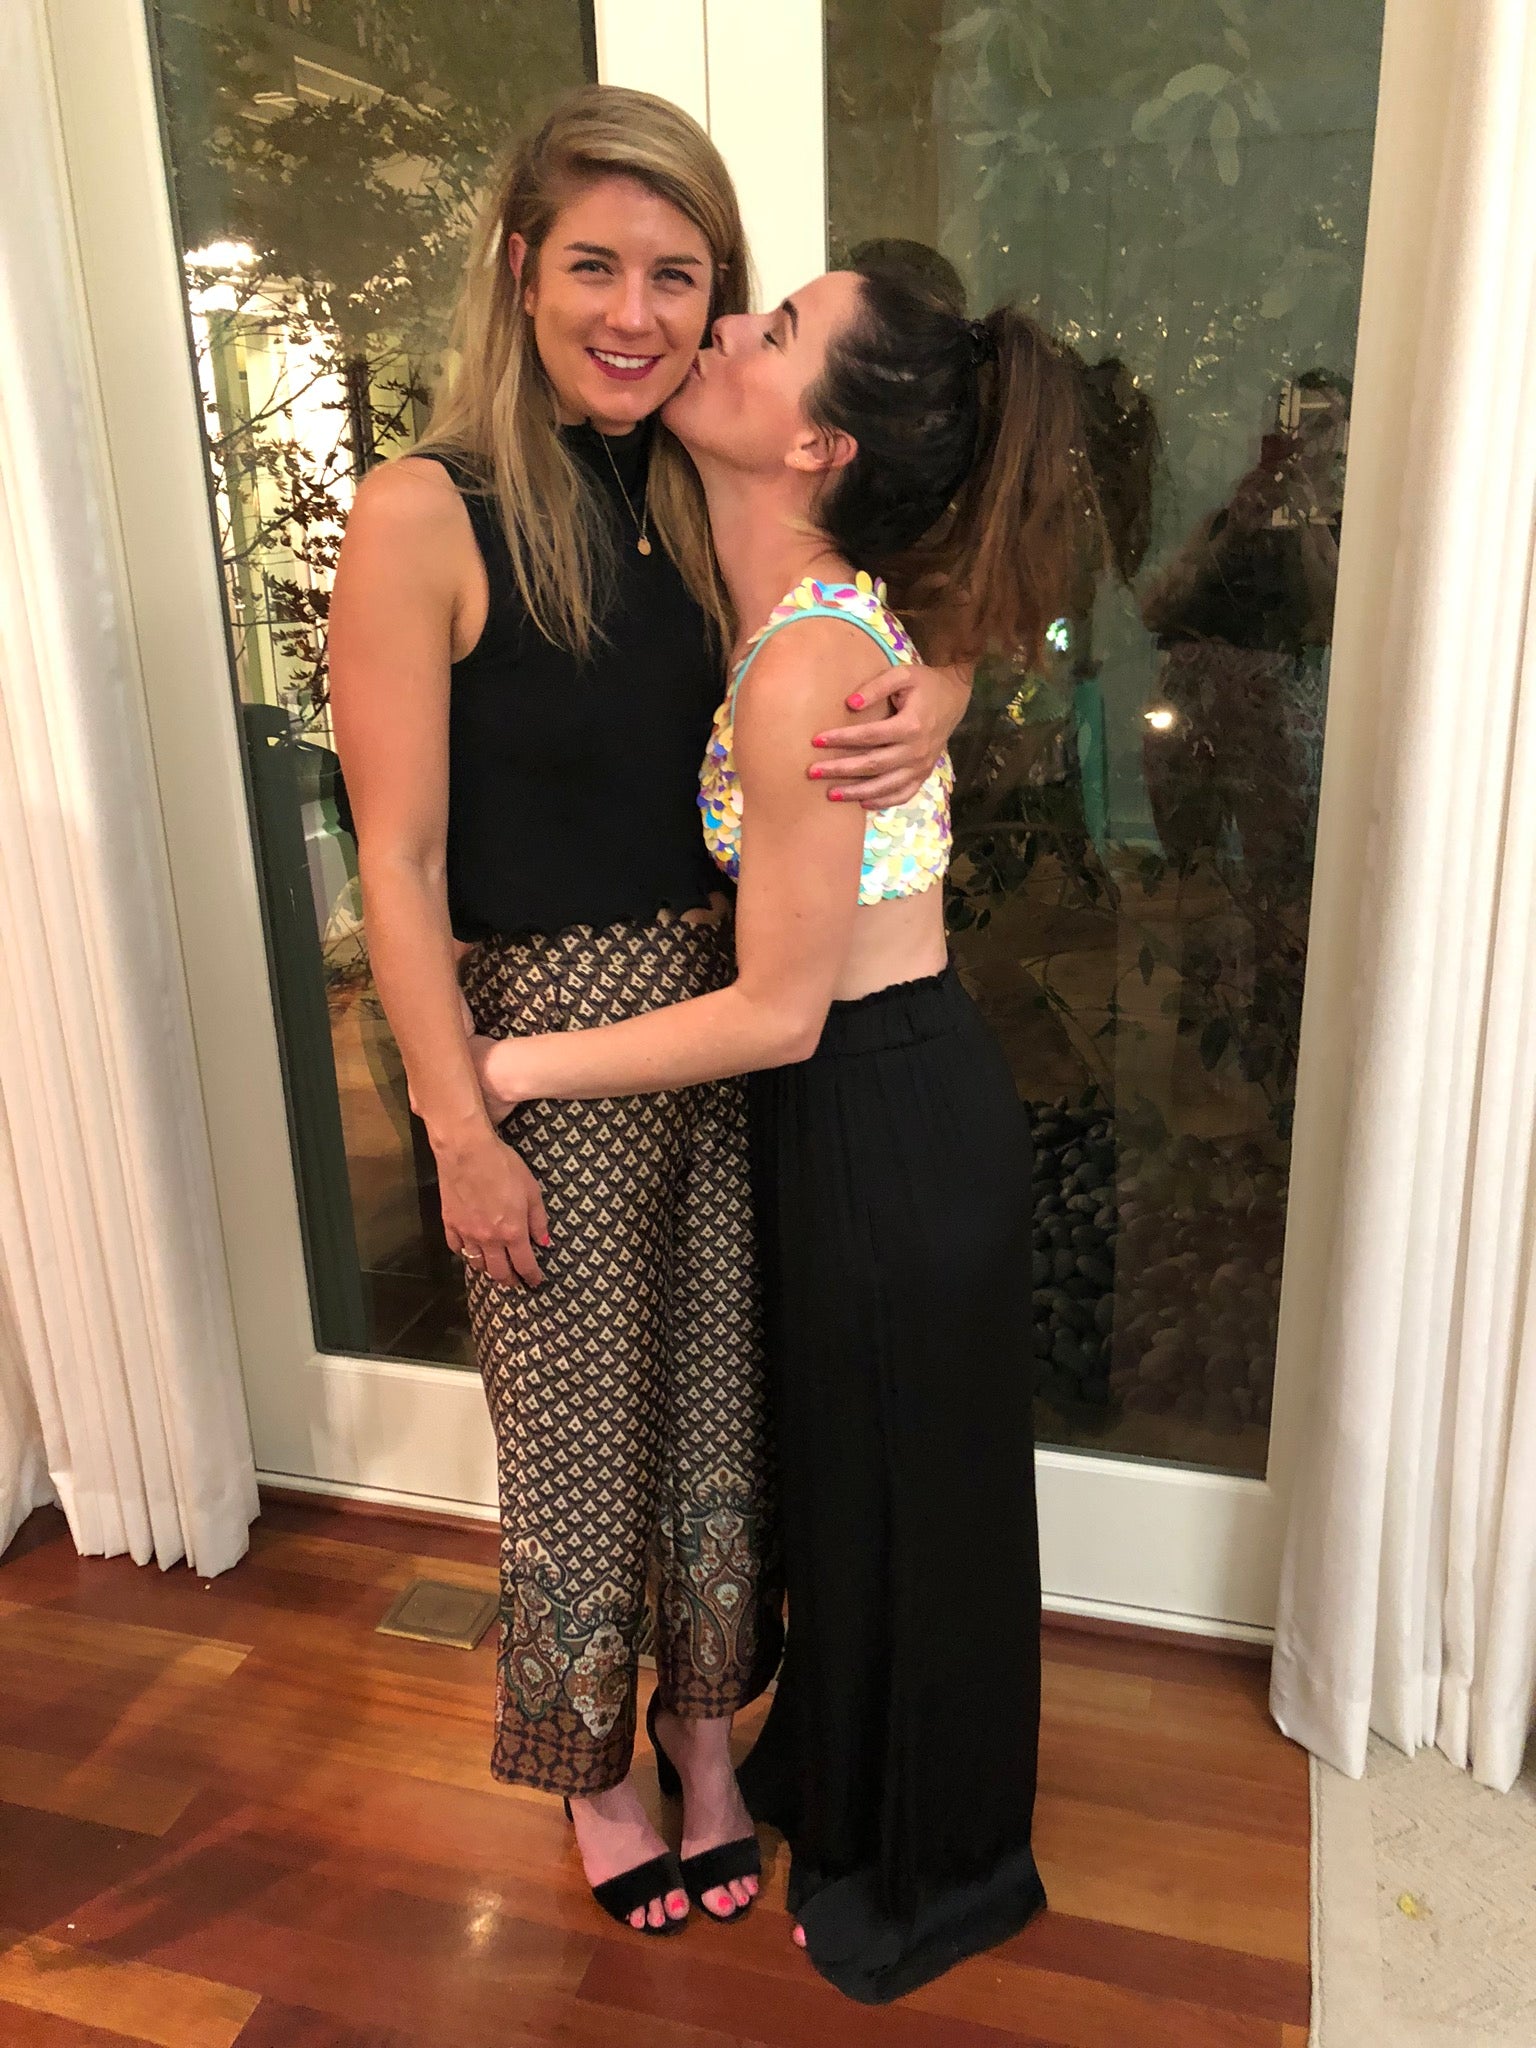 Woman in pearl sequin crop top kisses friend on the cheek